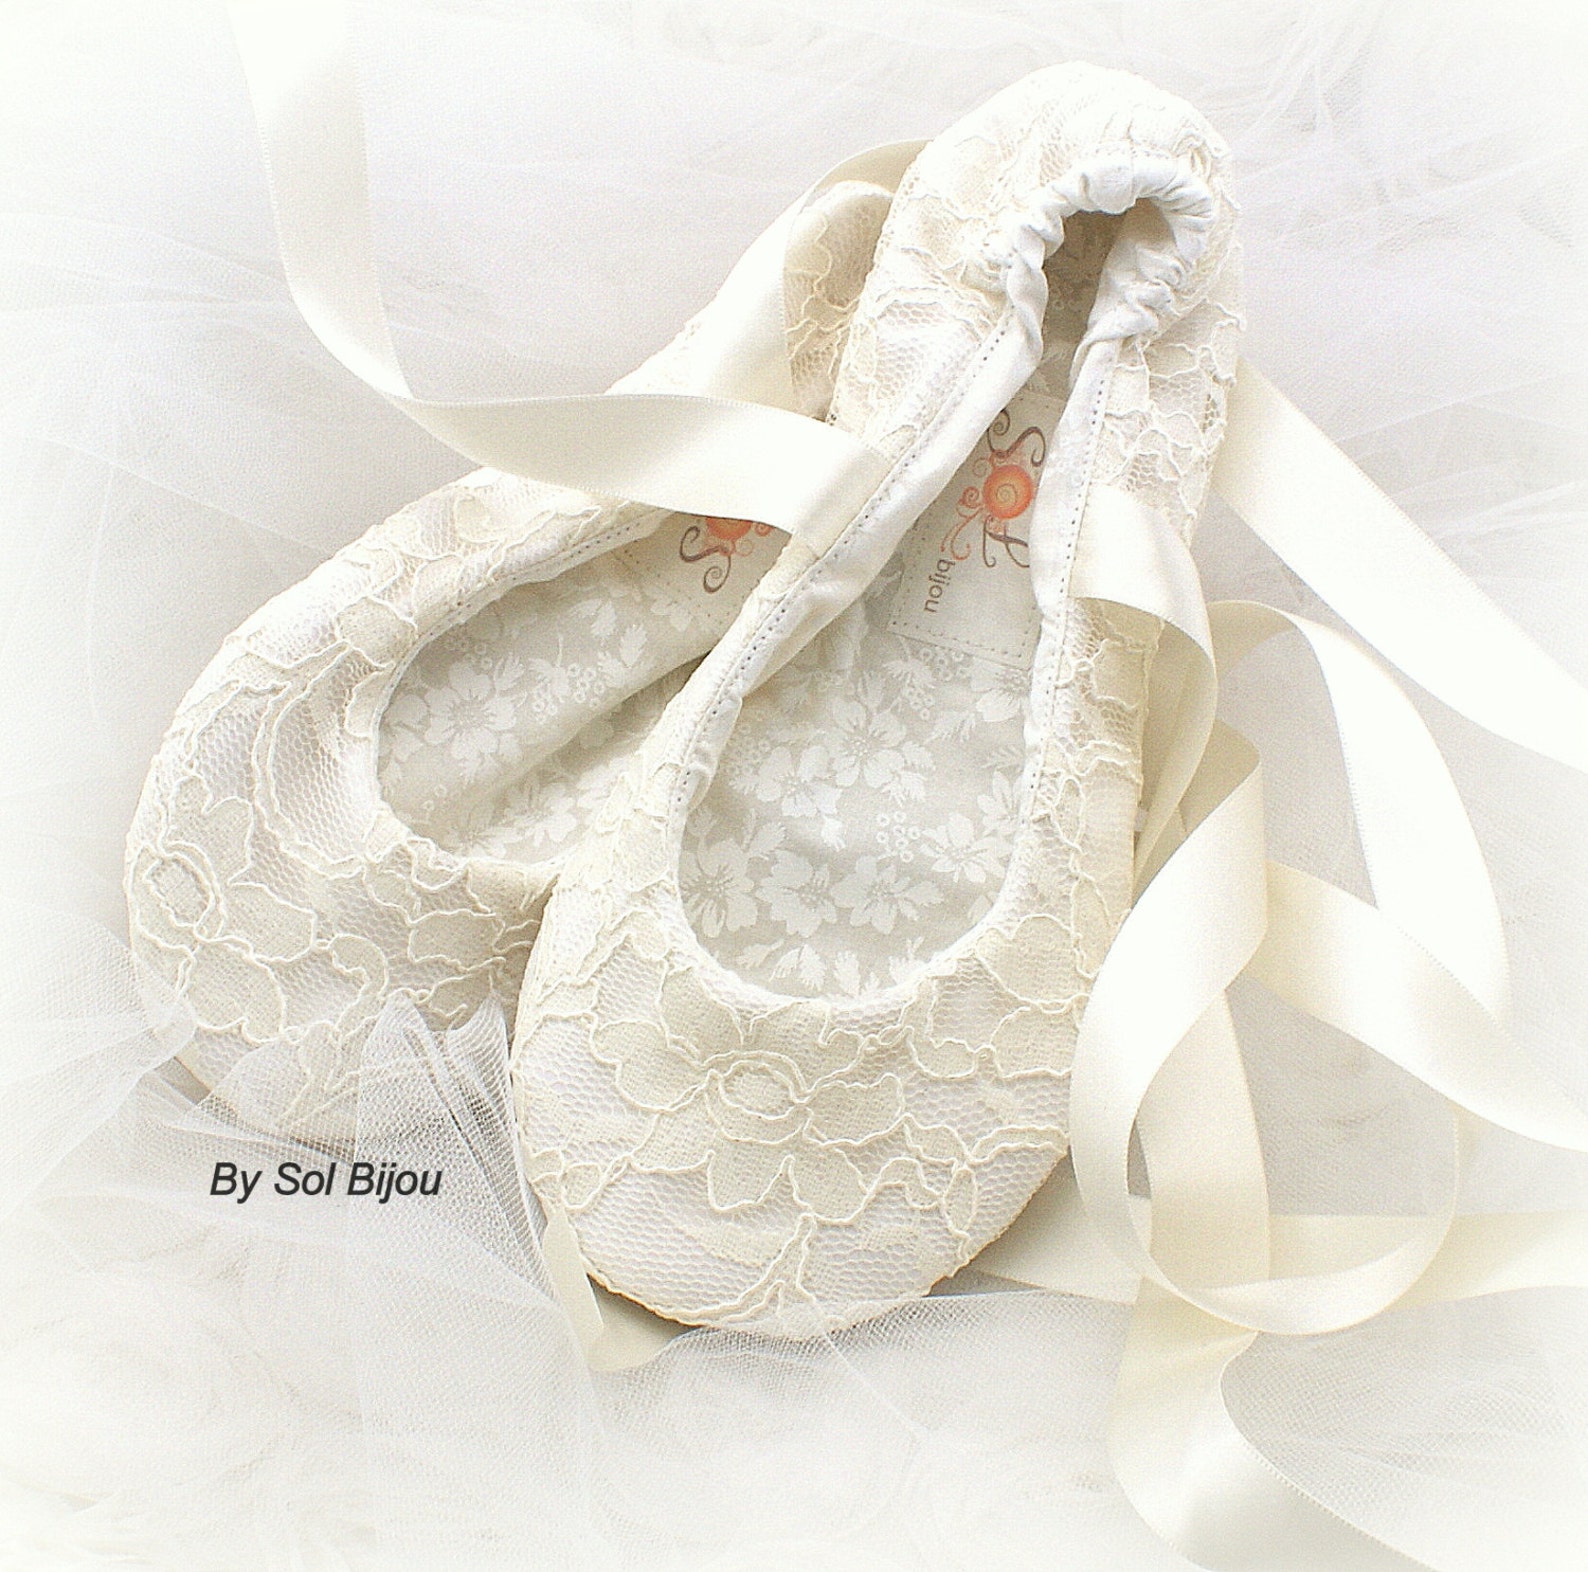 ivory ballet shoes